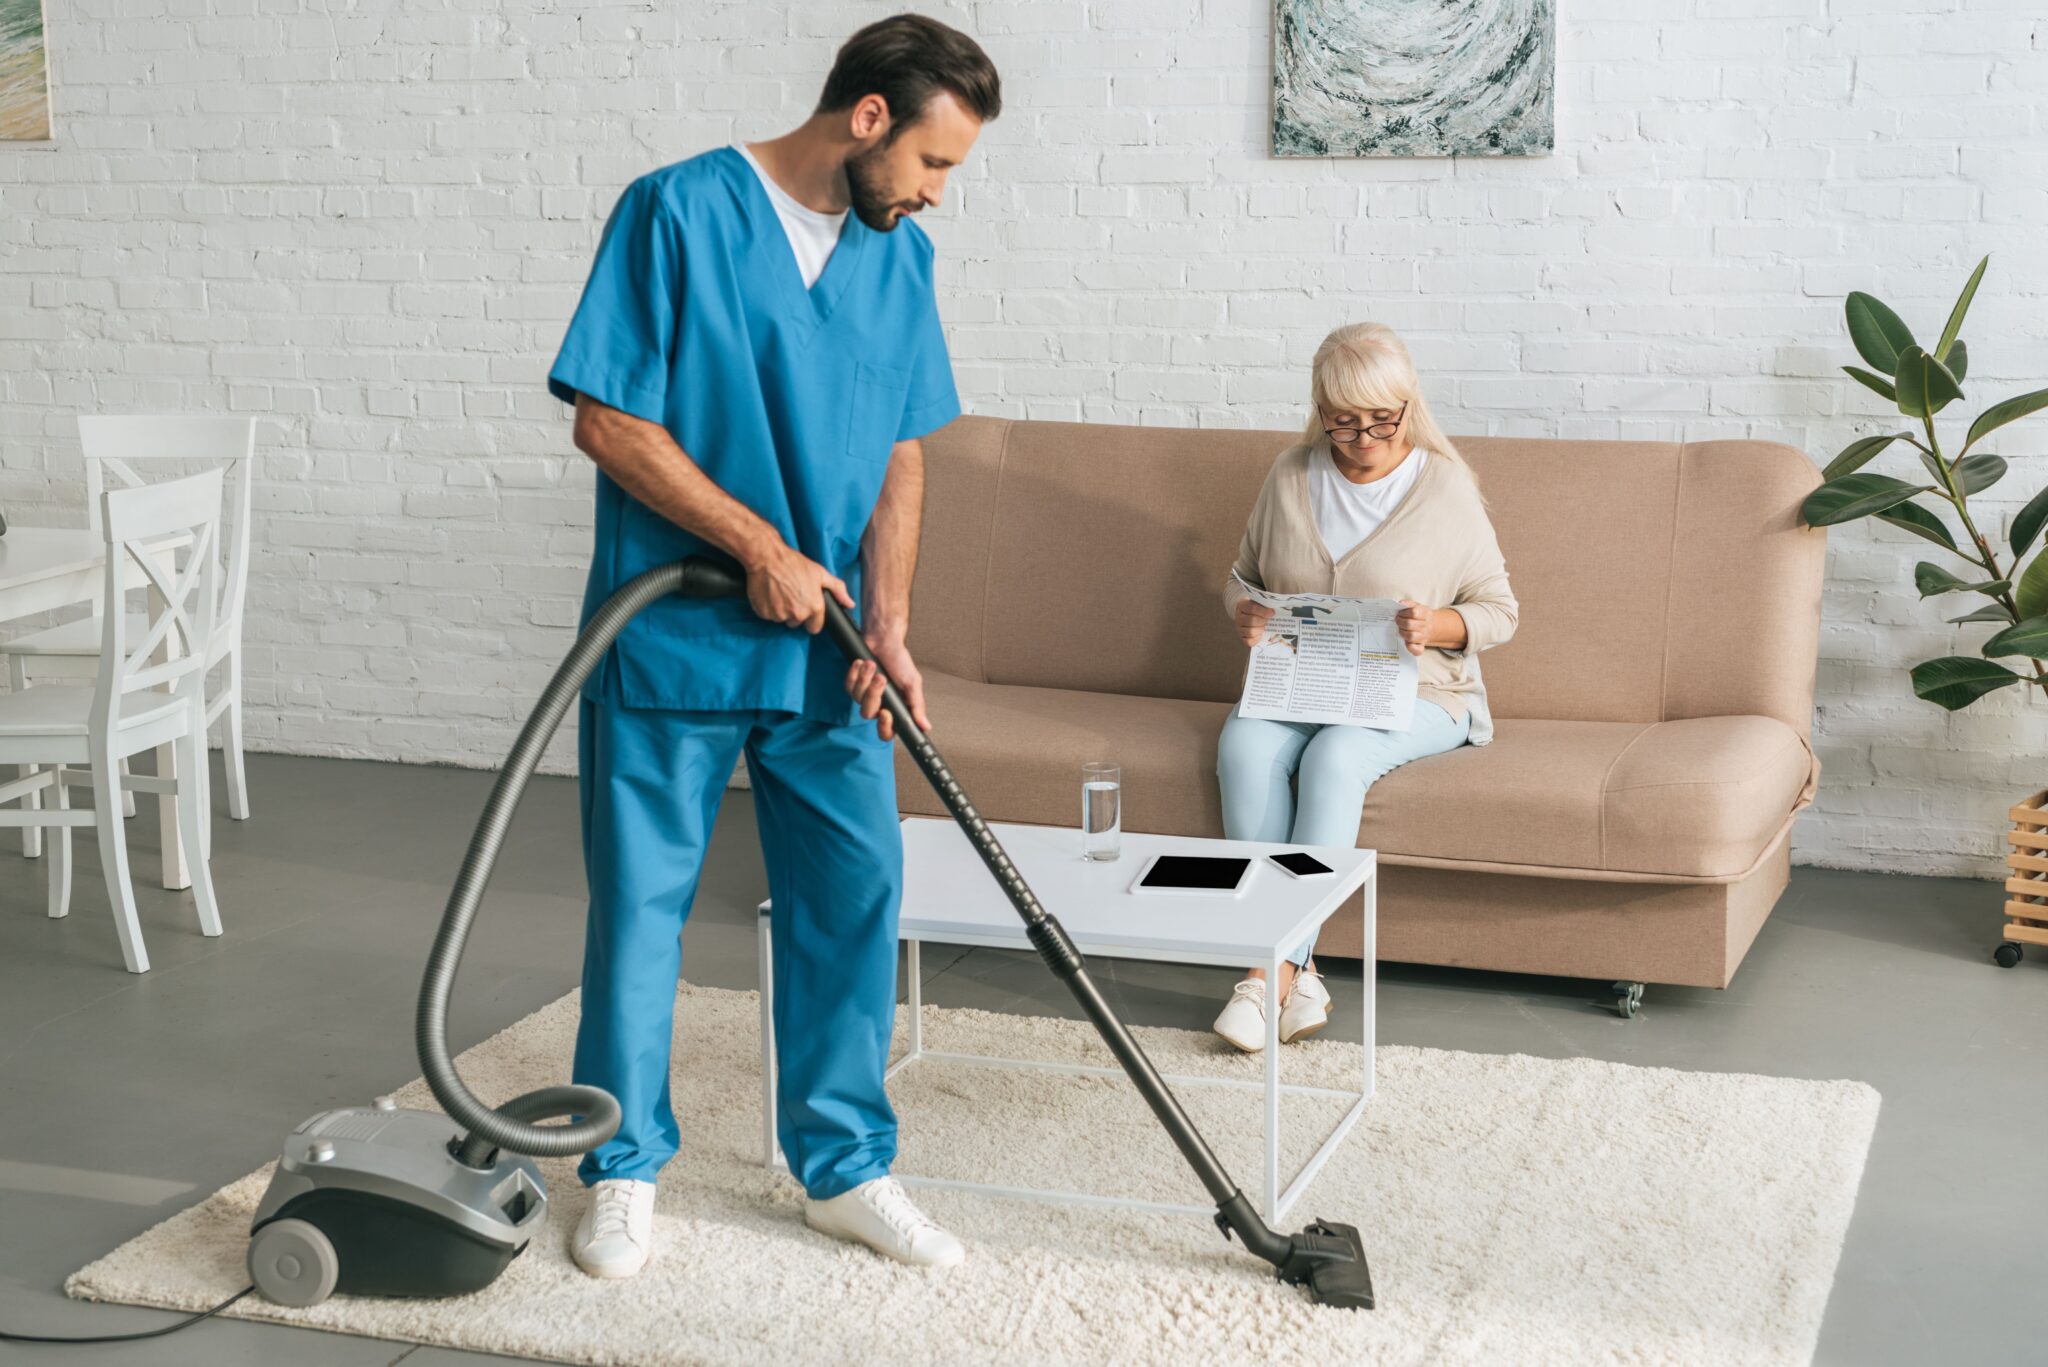  residential vs commercial cleaning